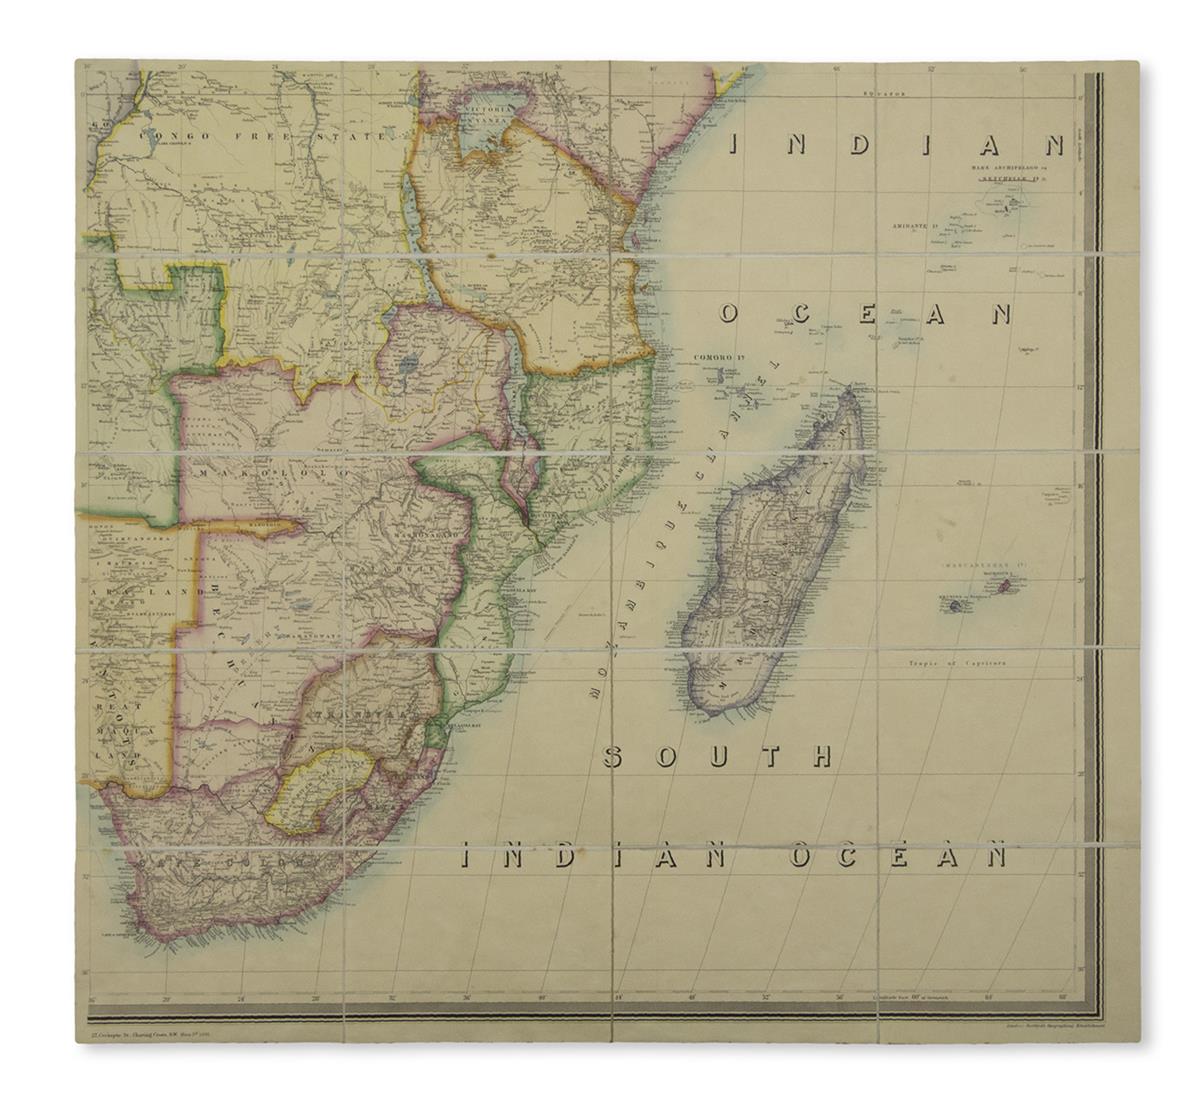 (AFRICA.) Stanford, Edward. Stanfords Library Map of Africa. New Edition, 1892.